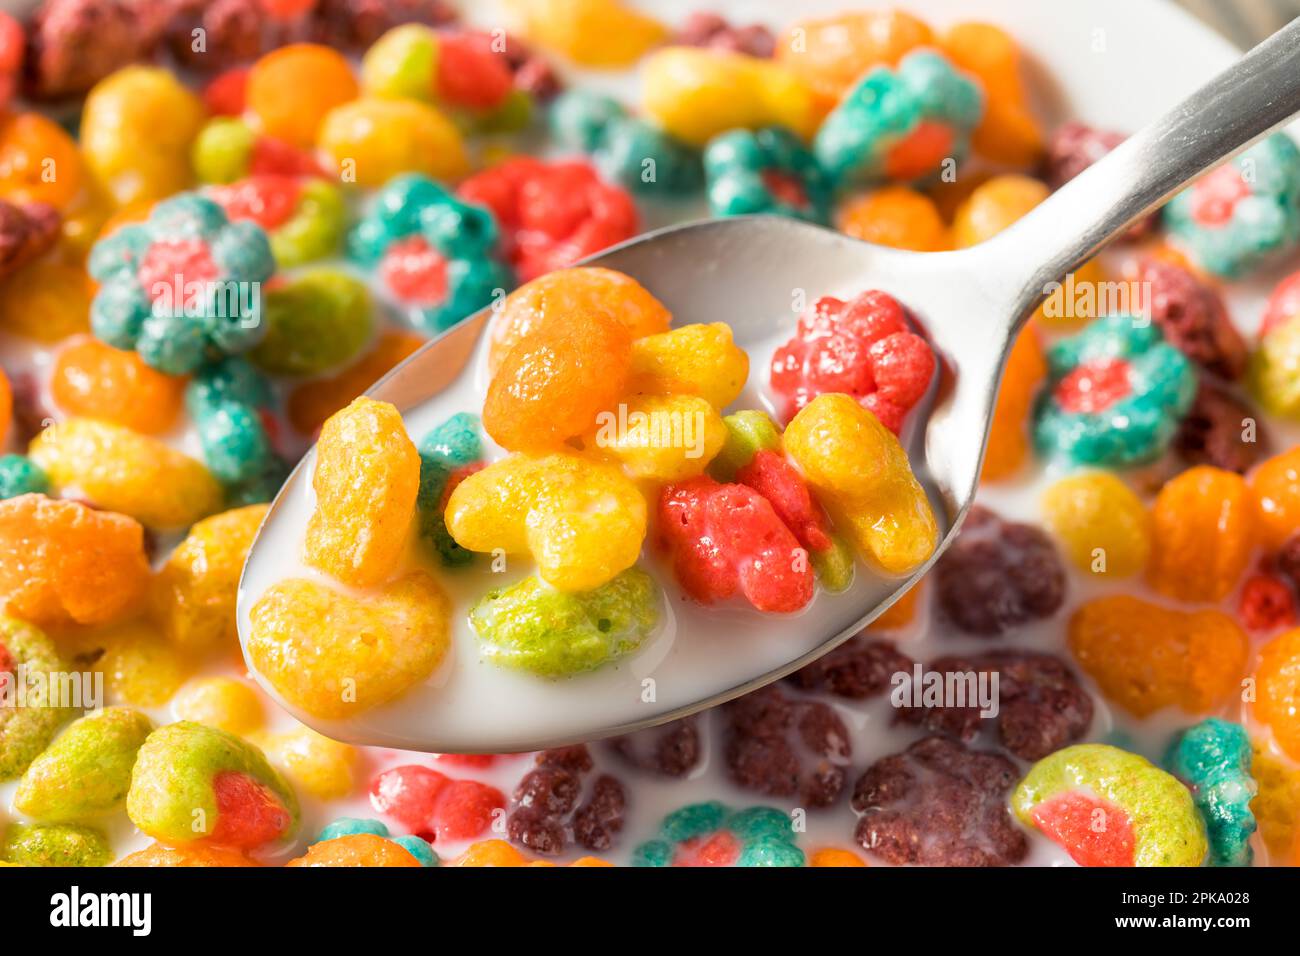 Sweet Fruity Breakfast Cereal with Whole Milk Stock Photo